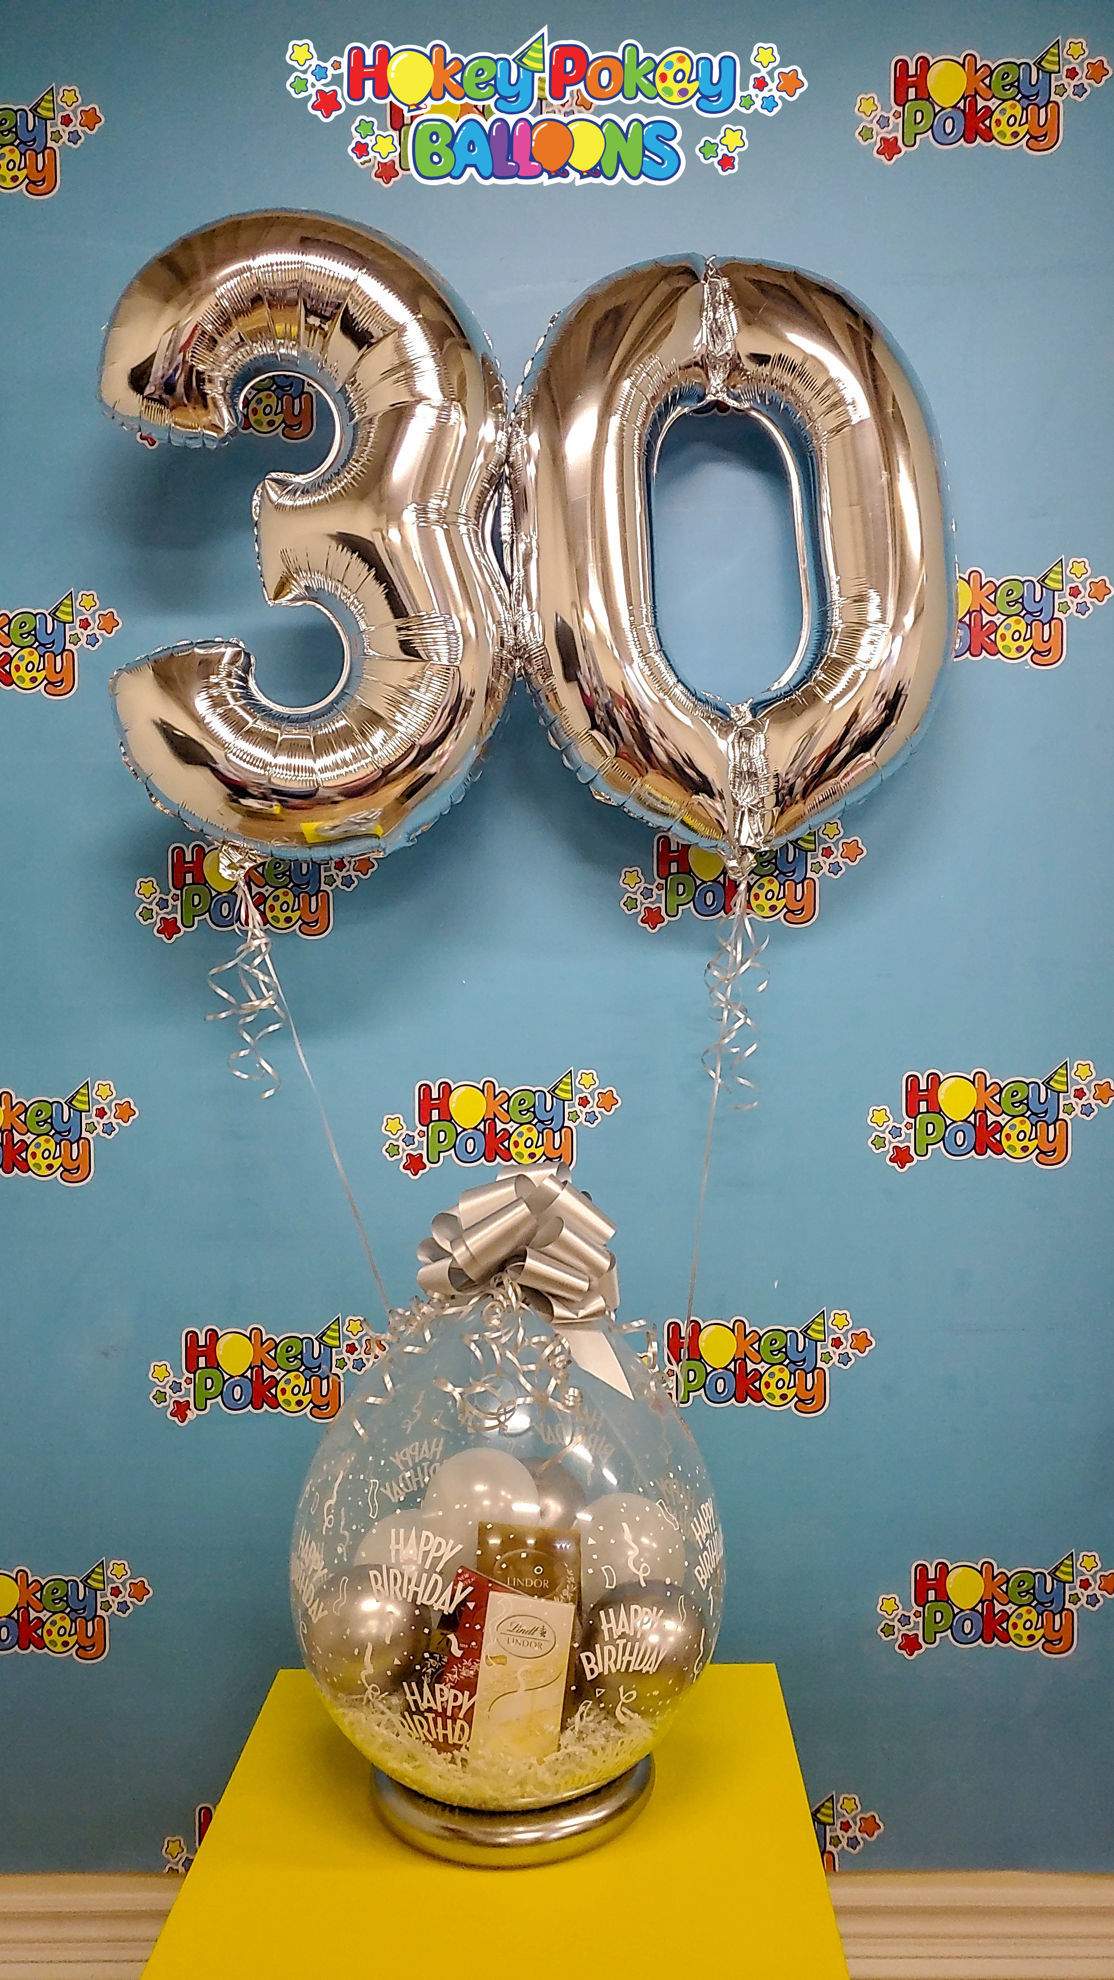 Picture of 26'' Silver Number 3 - Foil Balloon (helium-filled)